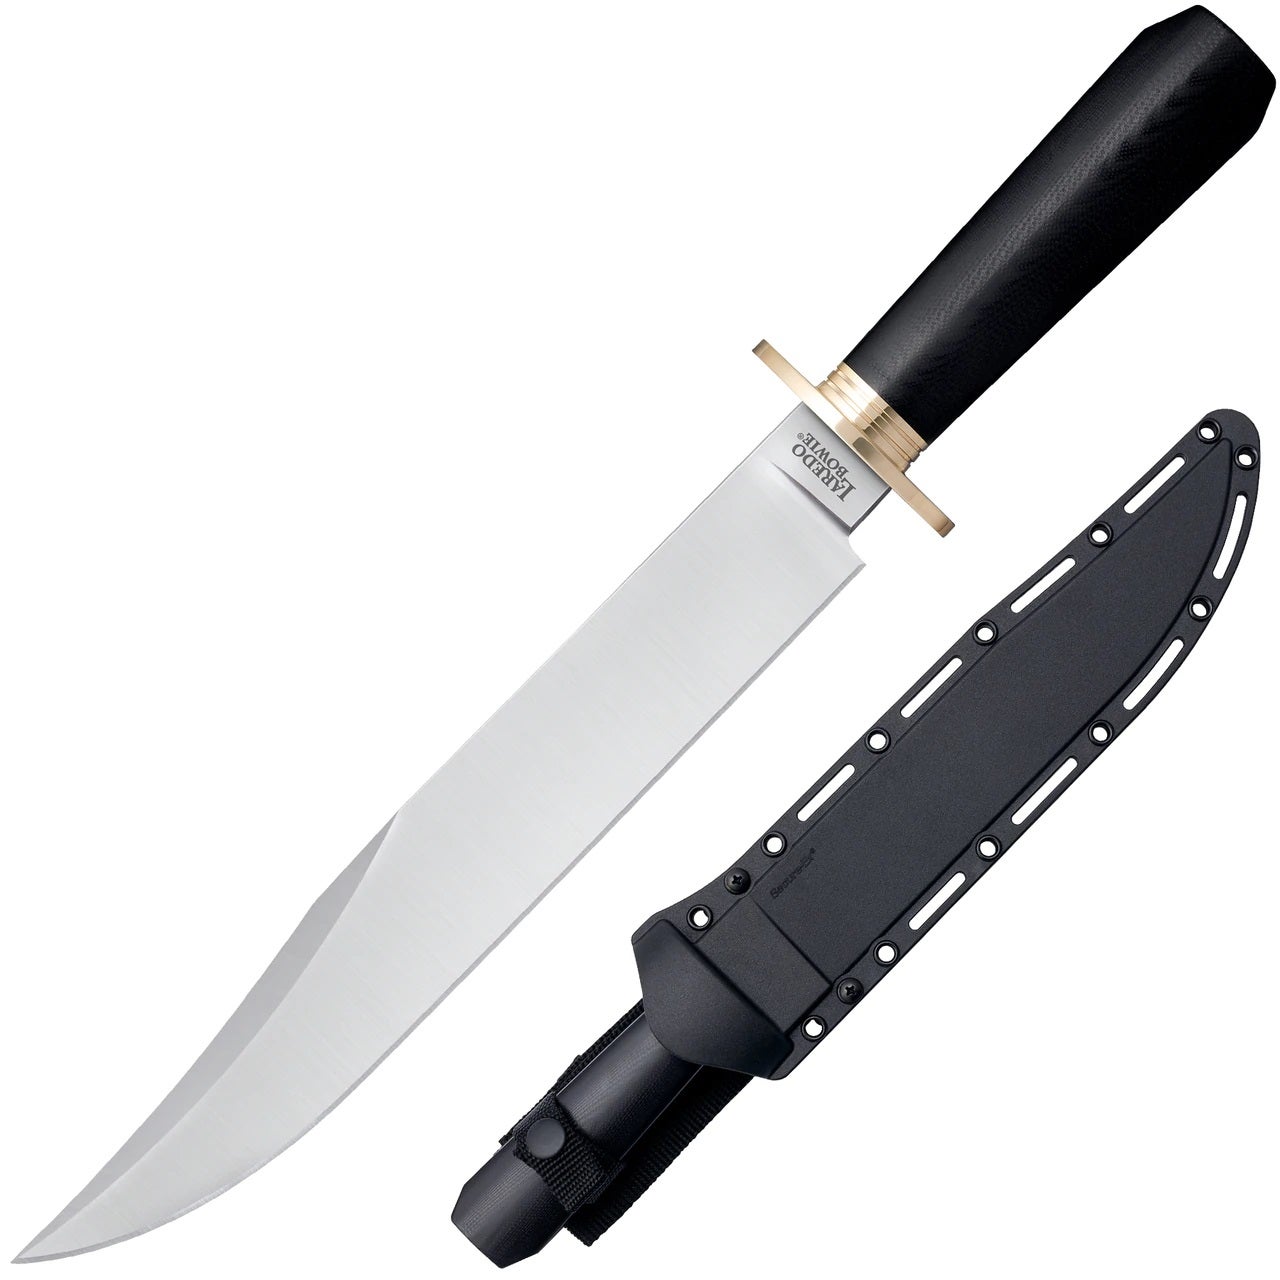 New Laredo Bowie in CMP 3V Introduced by Cold Steel